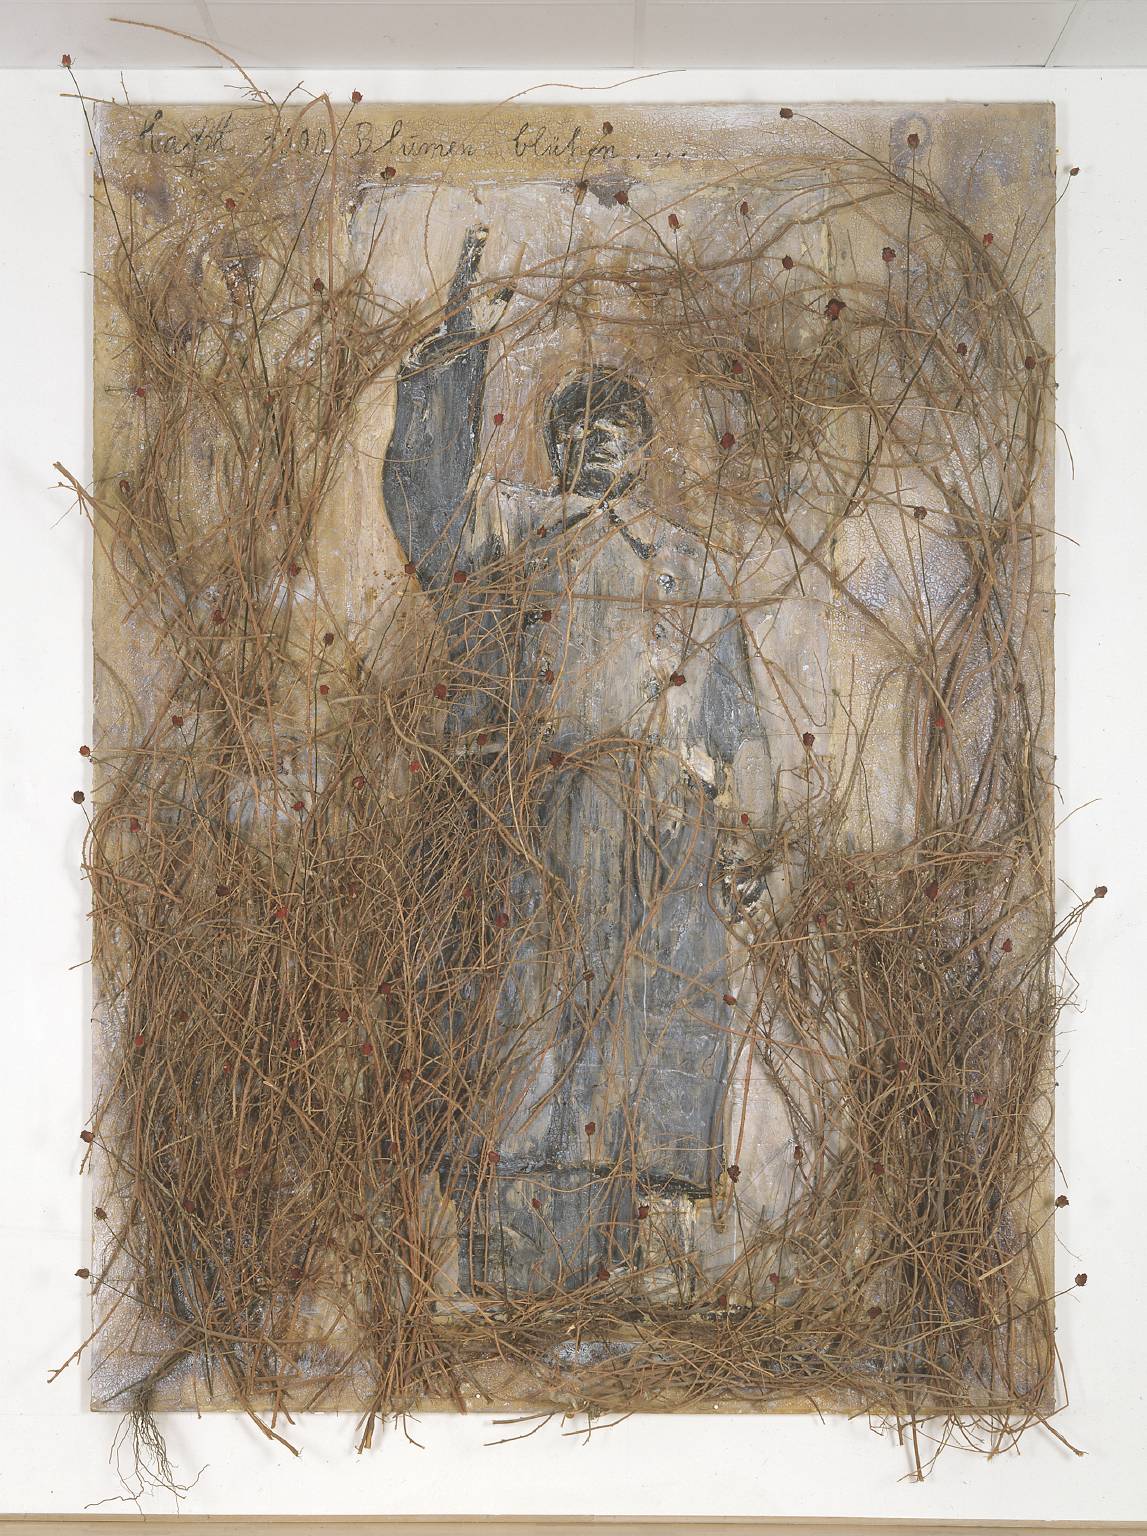 Anselm Kiefer | Let a Thousand Flowers Bloom, 2000